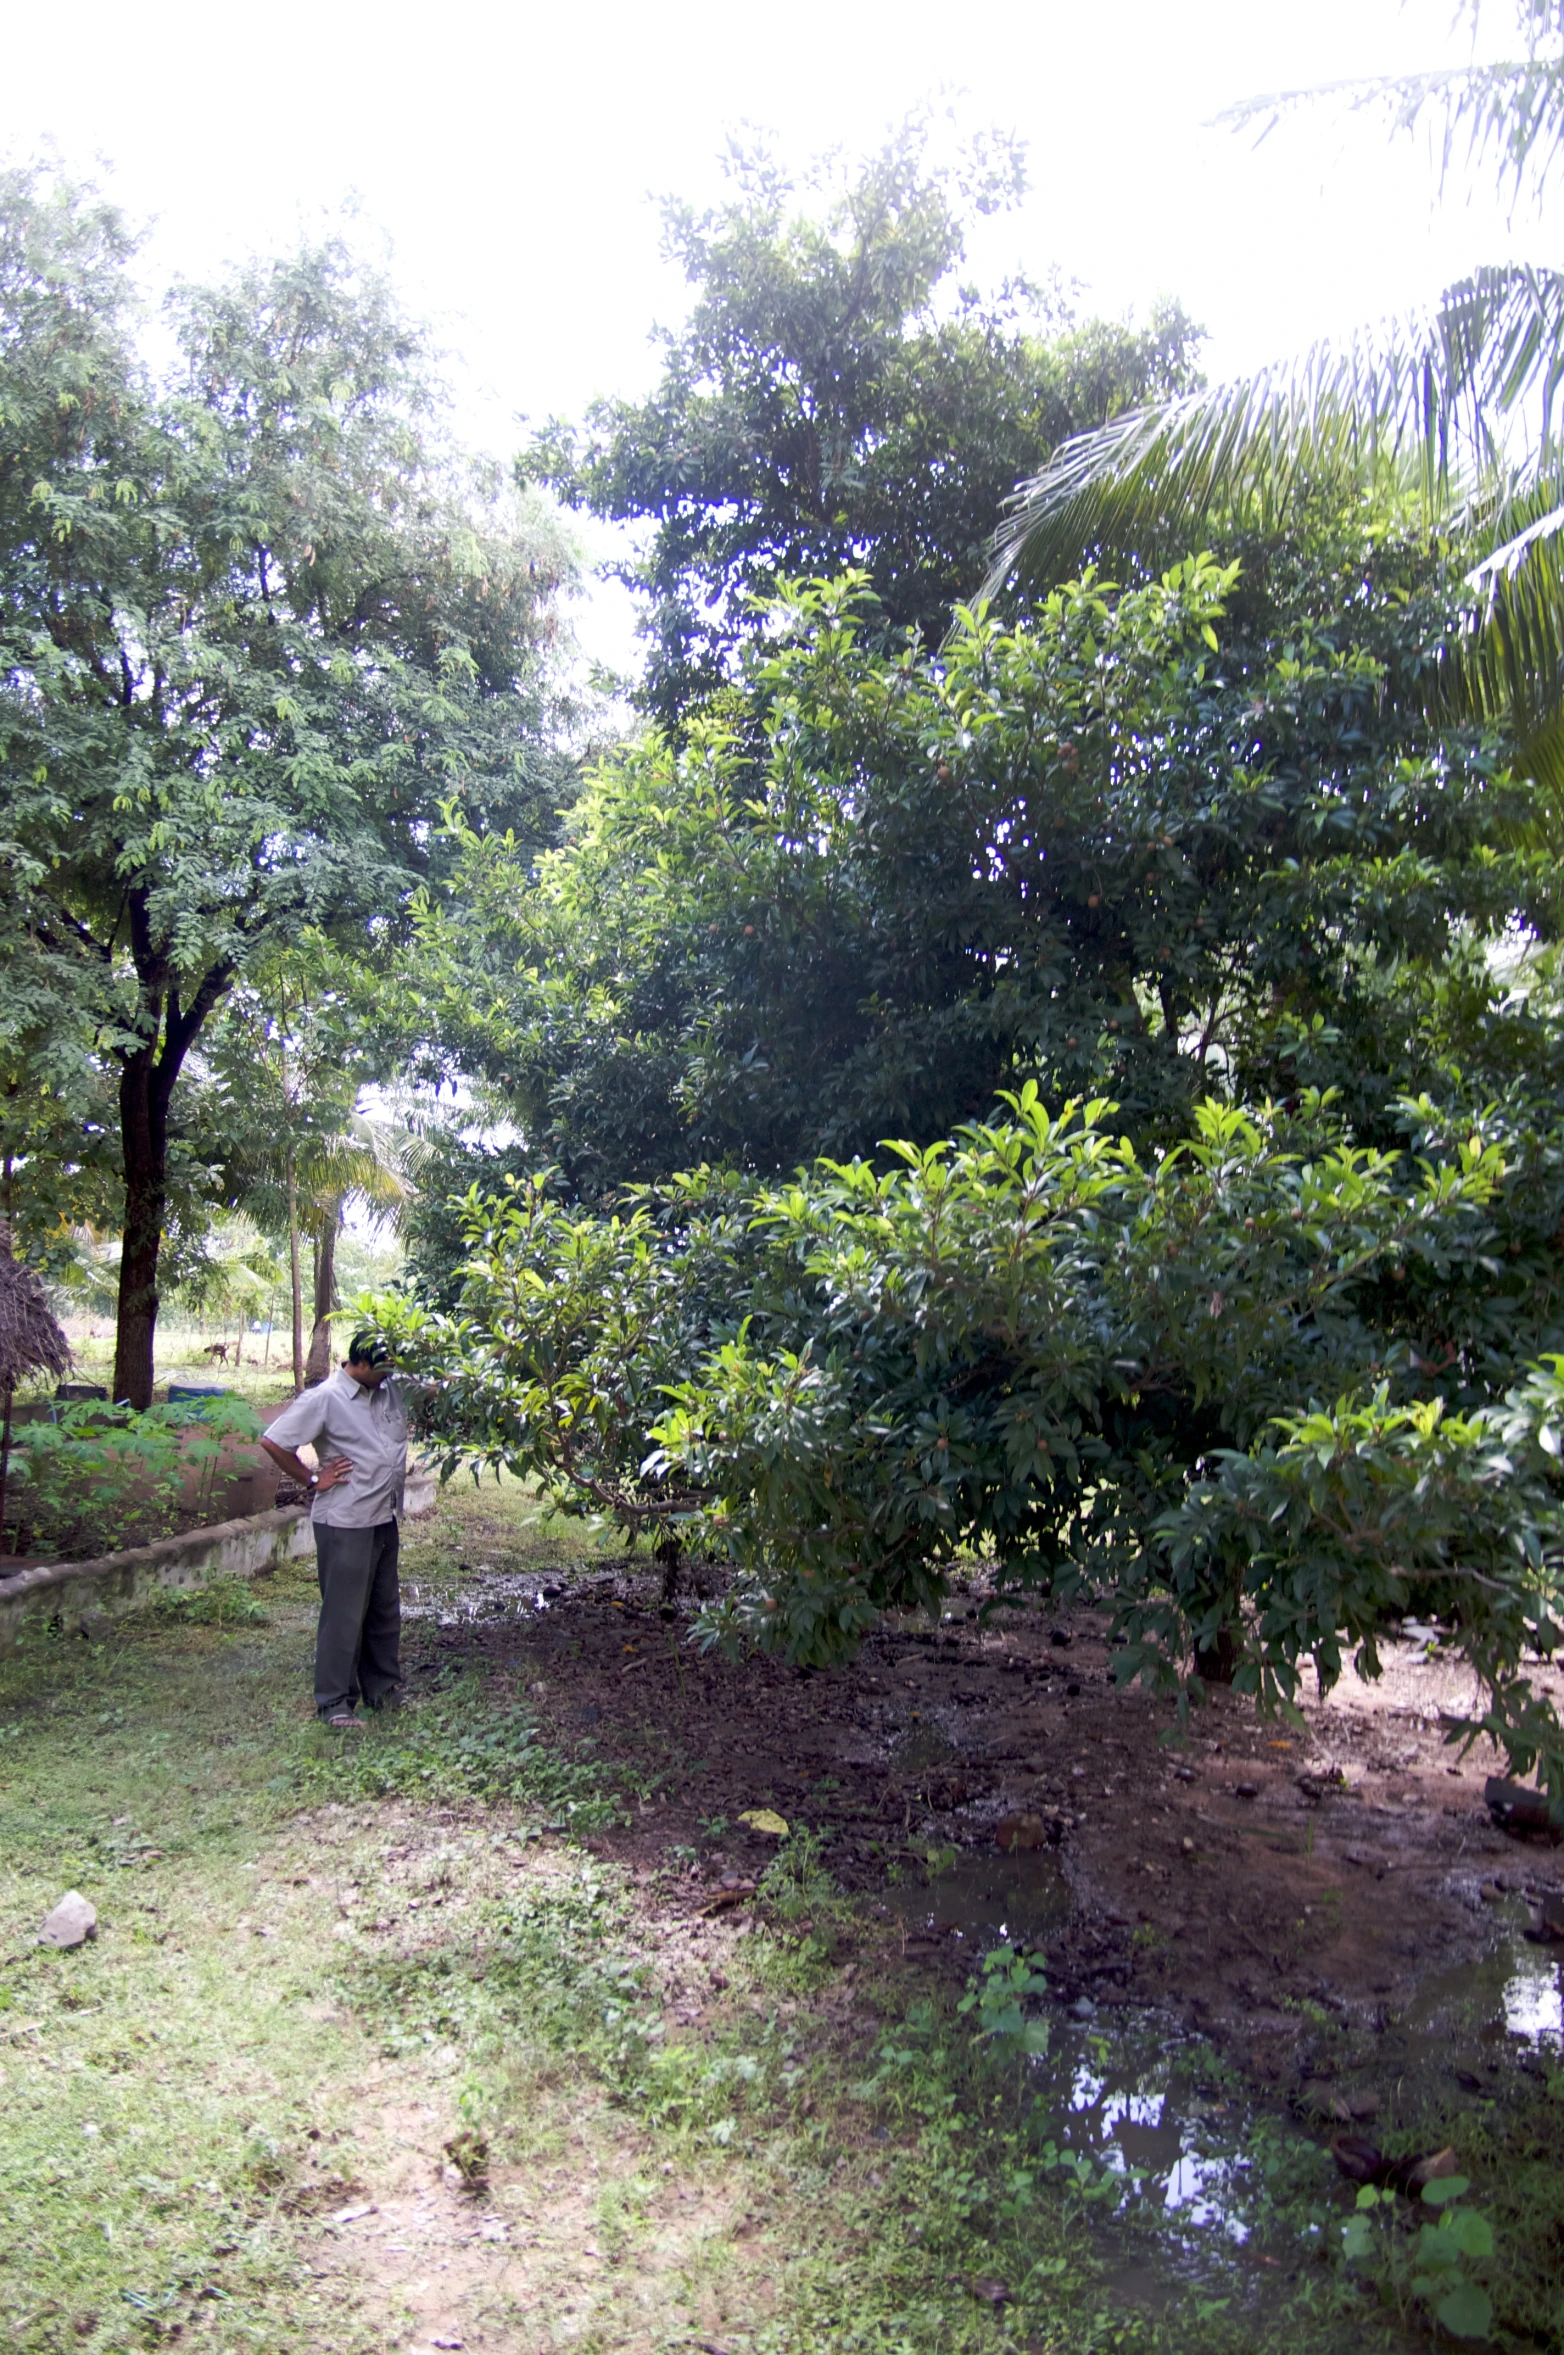 a man who is standing in the grass near trees